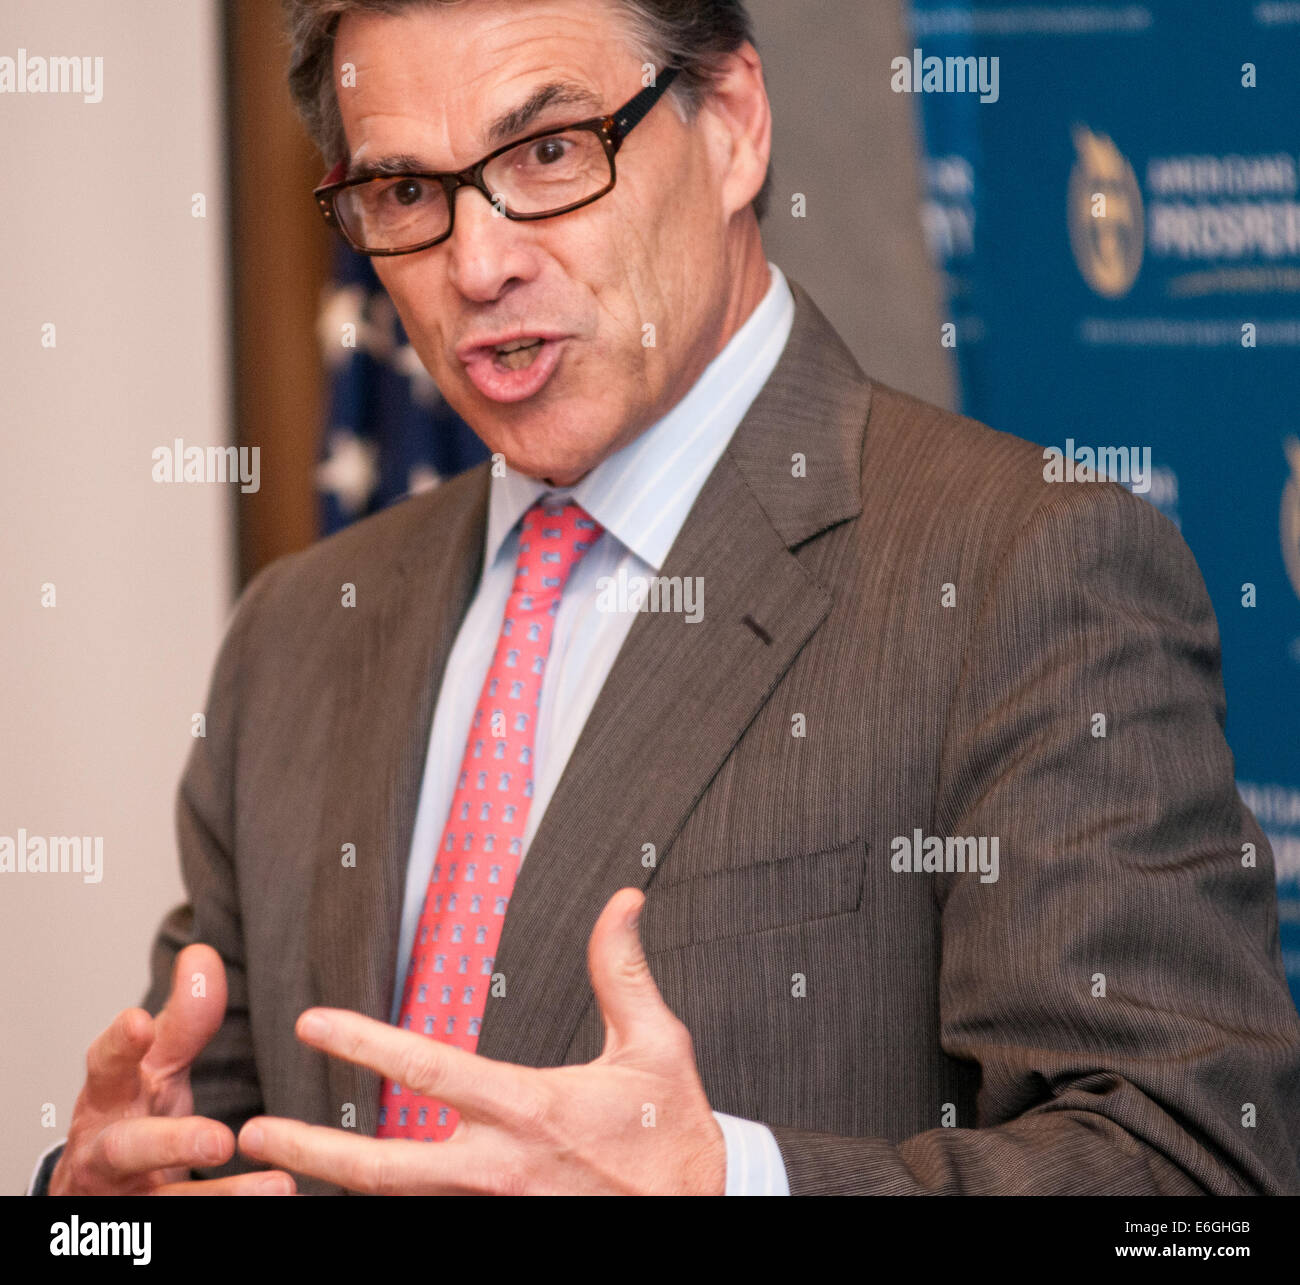 New Hampshire, USA. 22. August 2014. Texas-Gouverneur Rick Perry spricht in NH Credit: Andrew Cline/Alamy Live News Stockfoto